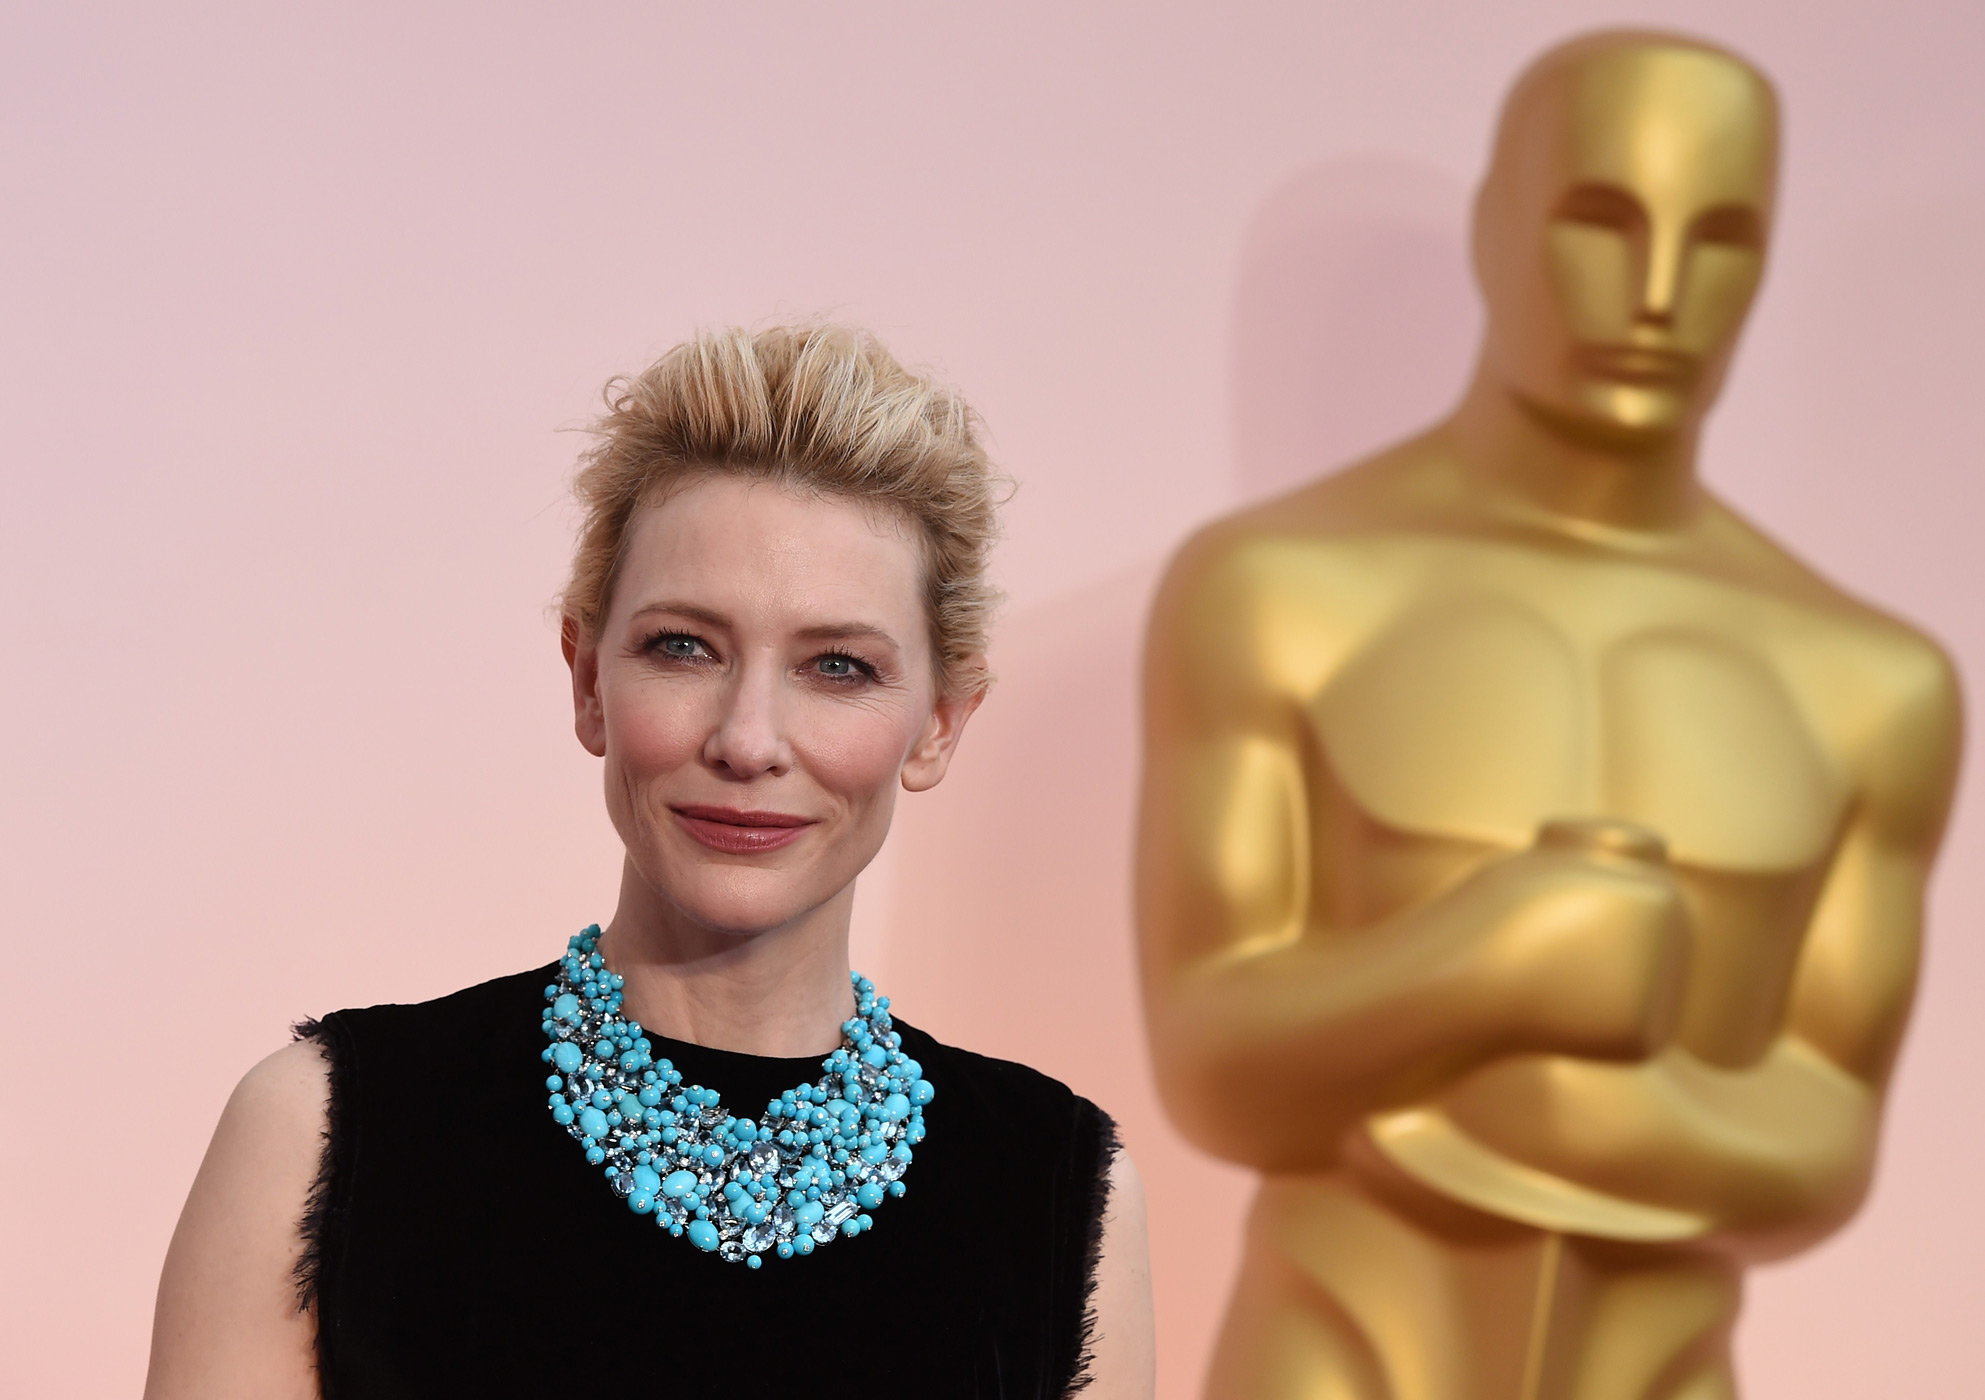 Cate Blanchett attends the 87th Annual Academy Awards on Feb. 22, 2015 in Hollywood, Calif. (Mark Ralston—AFP/Getty Images)